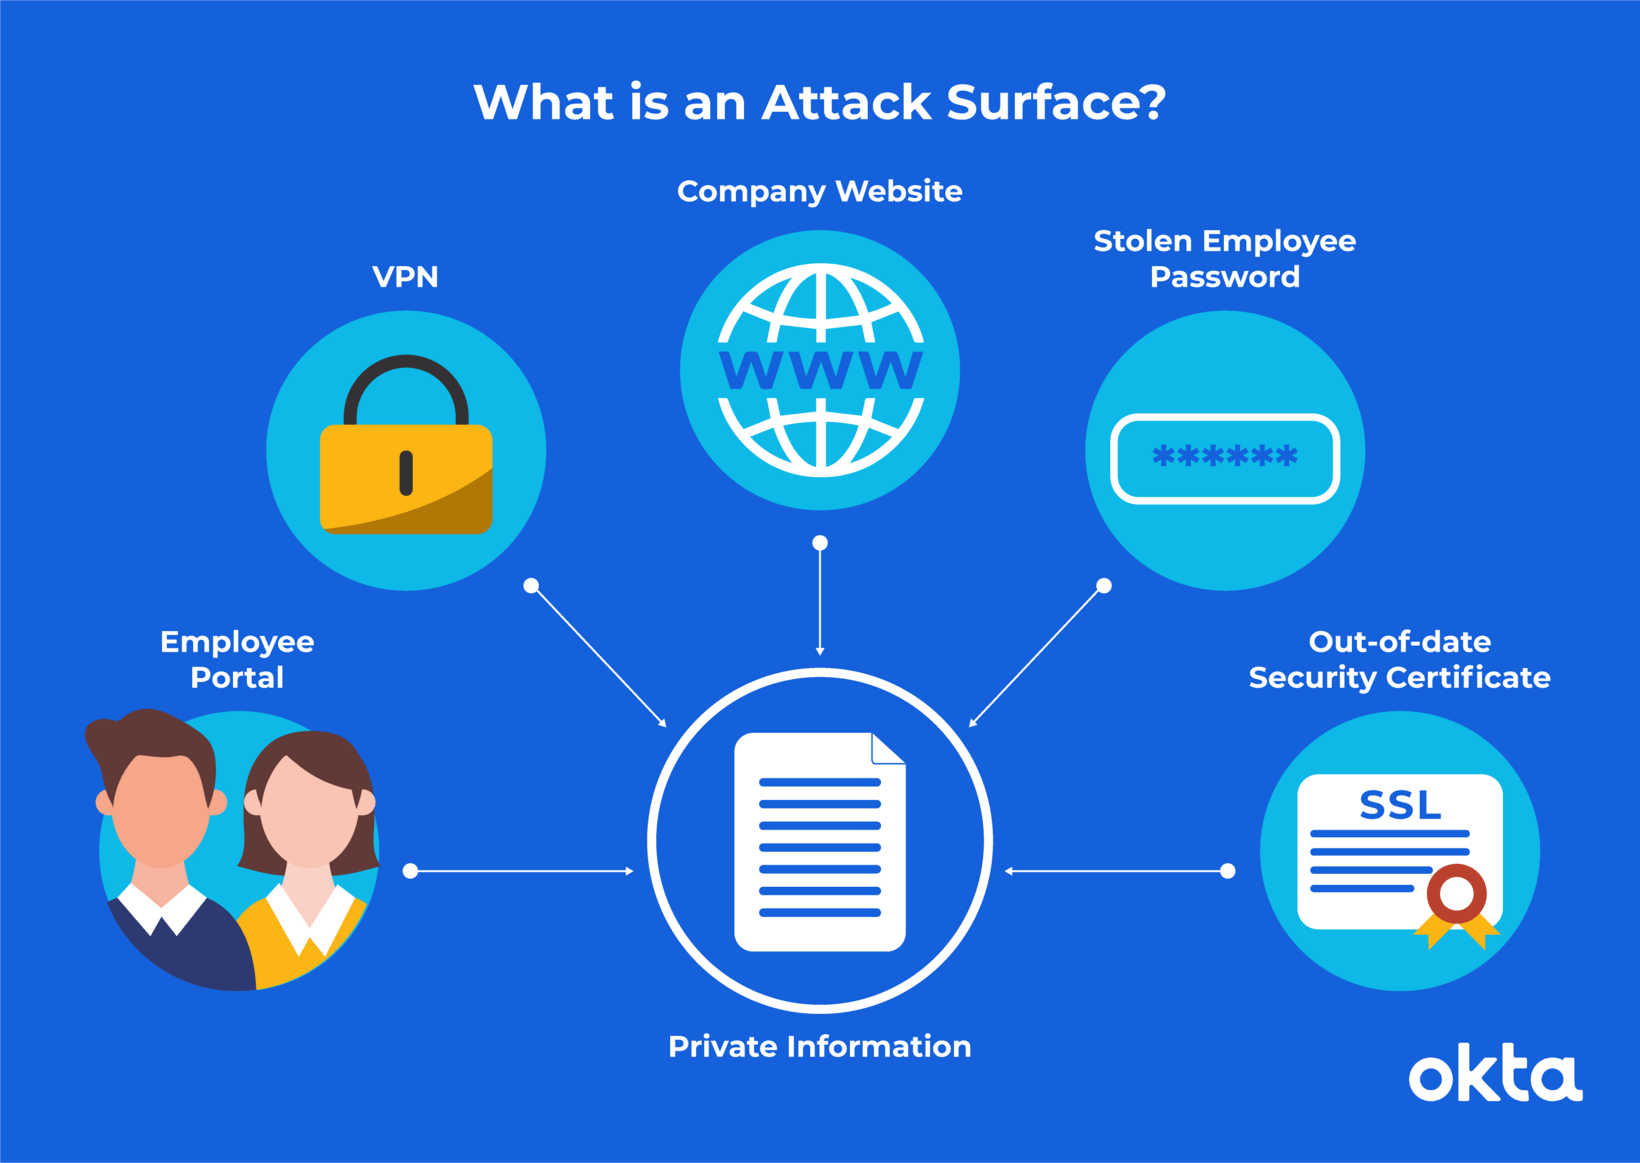 Figure 1 attack surface expanding 7 top trends in cybersecurity for 2022 Figure 1 attack surface expanding 7 top trends in cybersecurity for 2022 Figure 1 attack surface expanding 7 top trends in cybersecurity for 2022